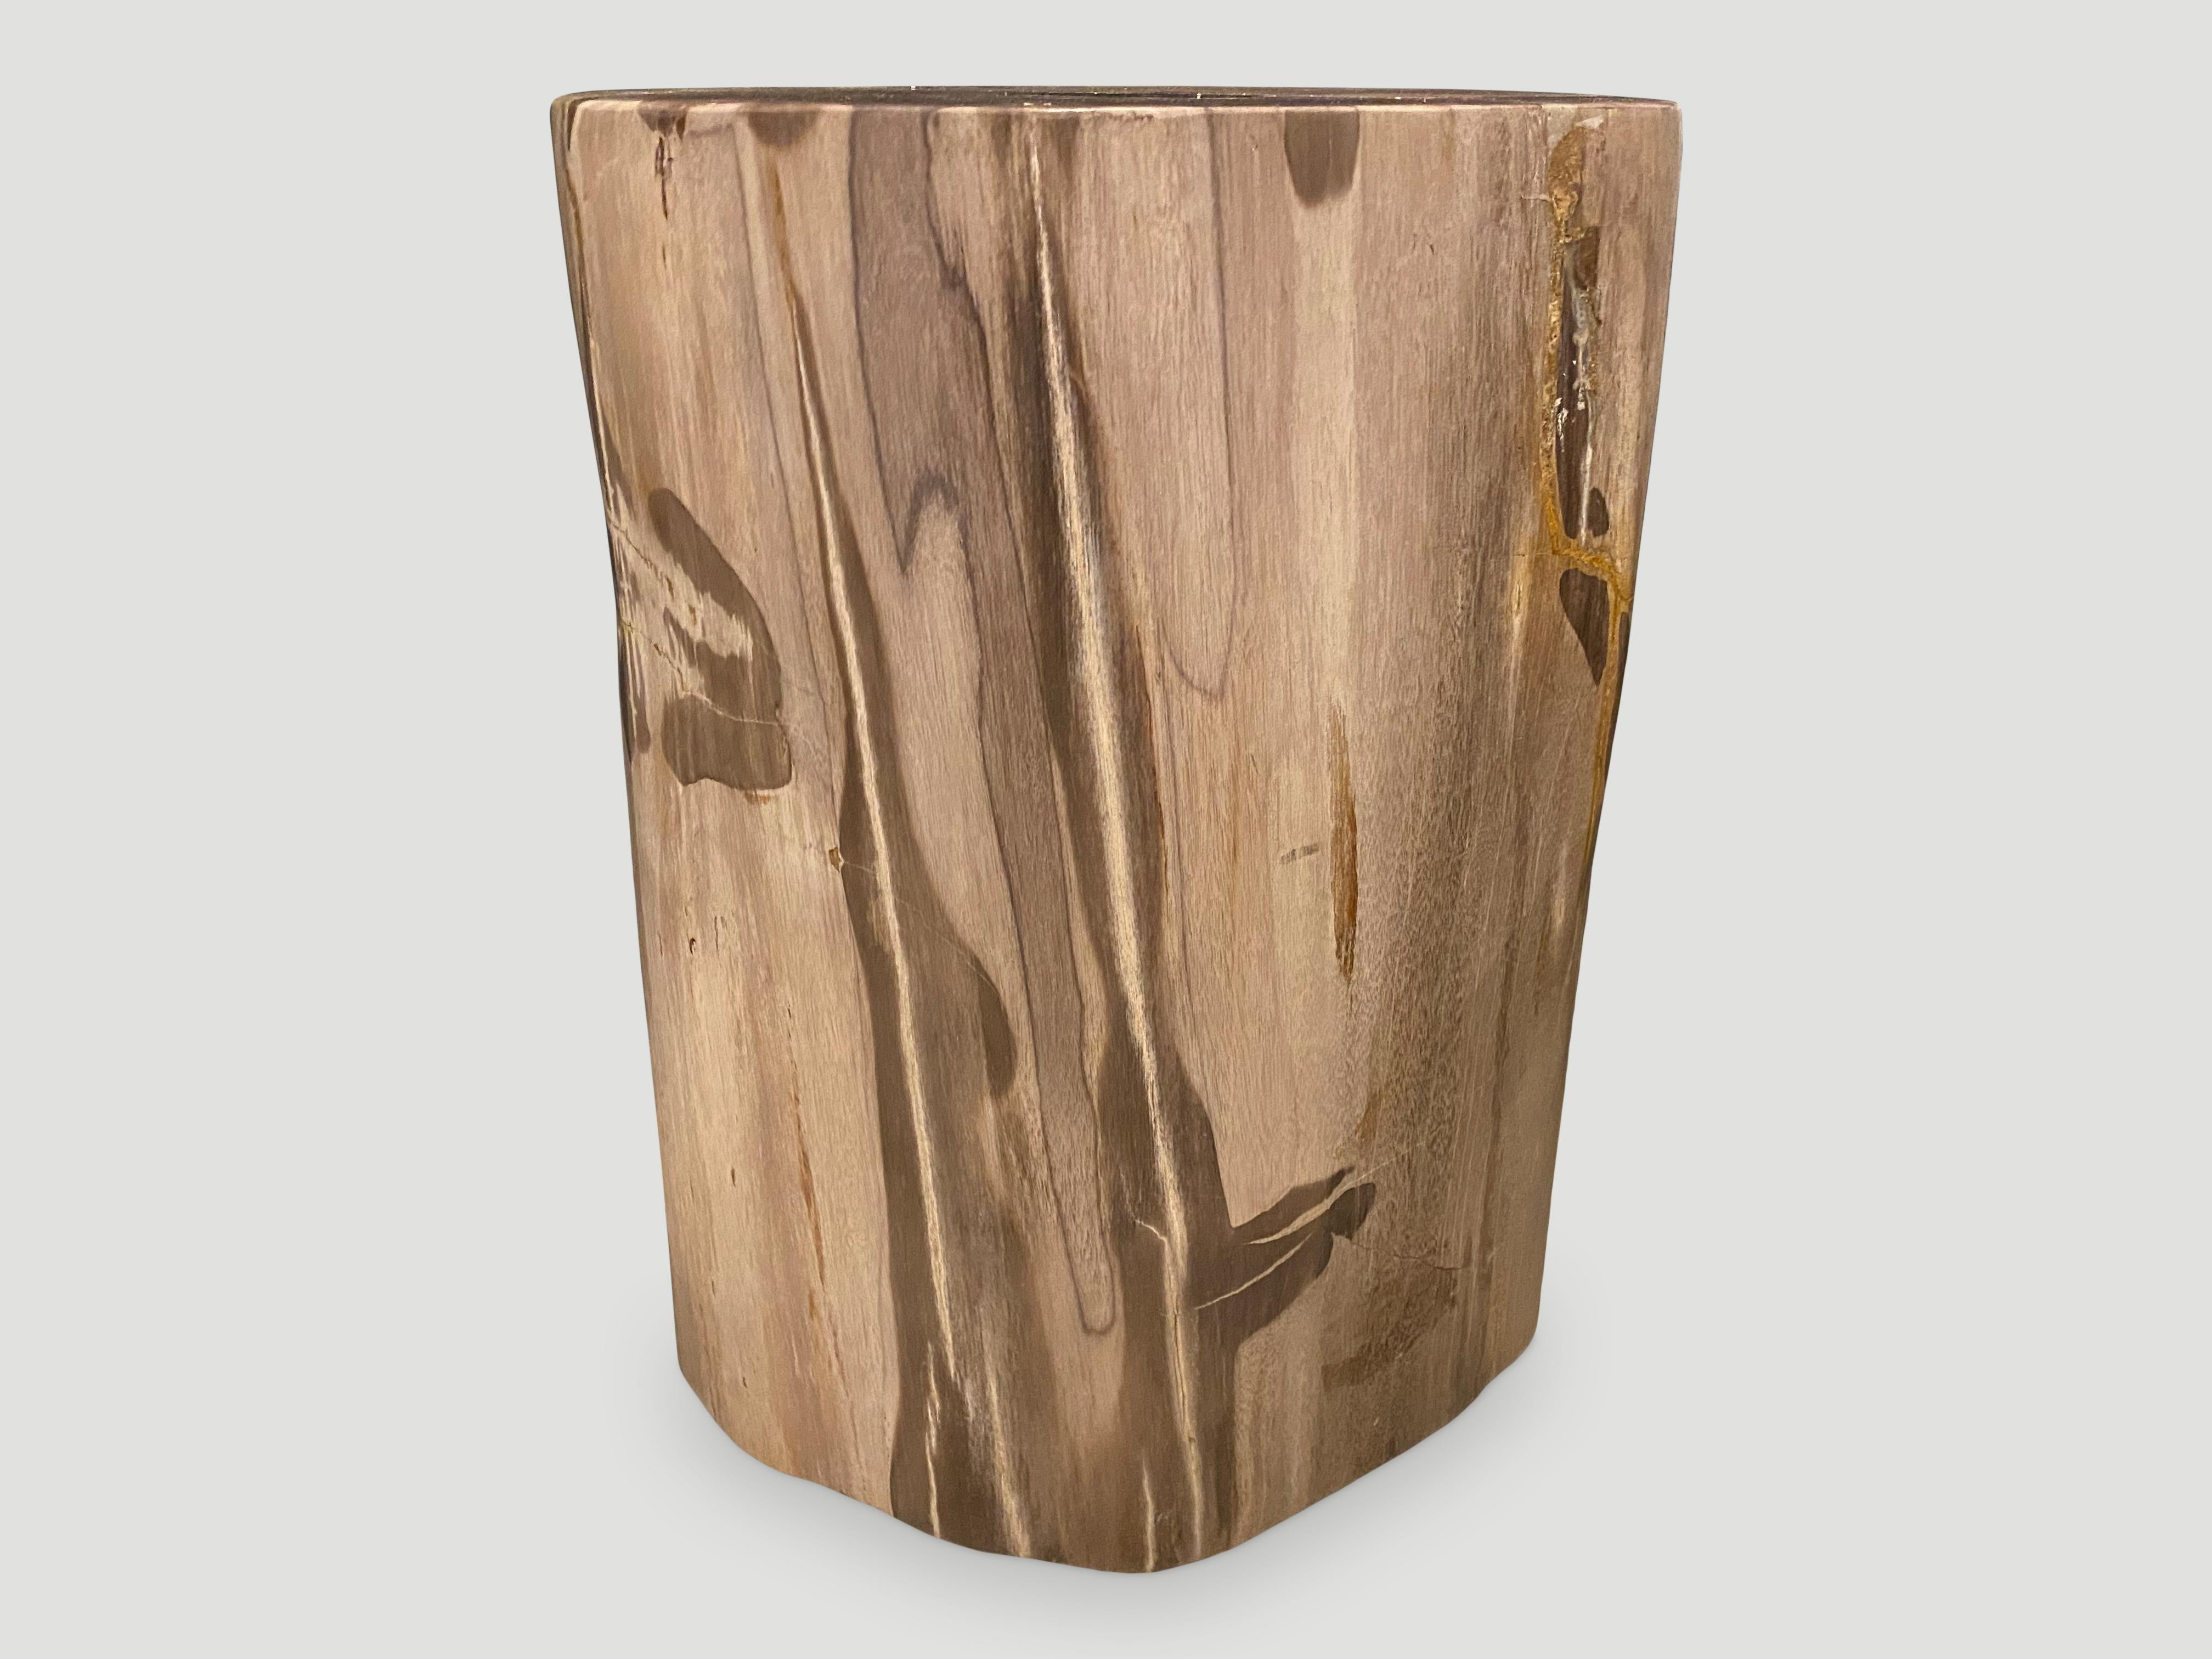 Beautiful rare tones with stunning natural markings in this petrified wood side table. We added a resin drop to the top in a darker contrasting tone. It’s fascinating how Mother Nature produces these exquisite 40 million year old petrified teak logs